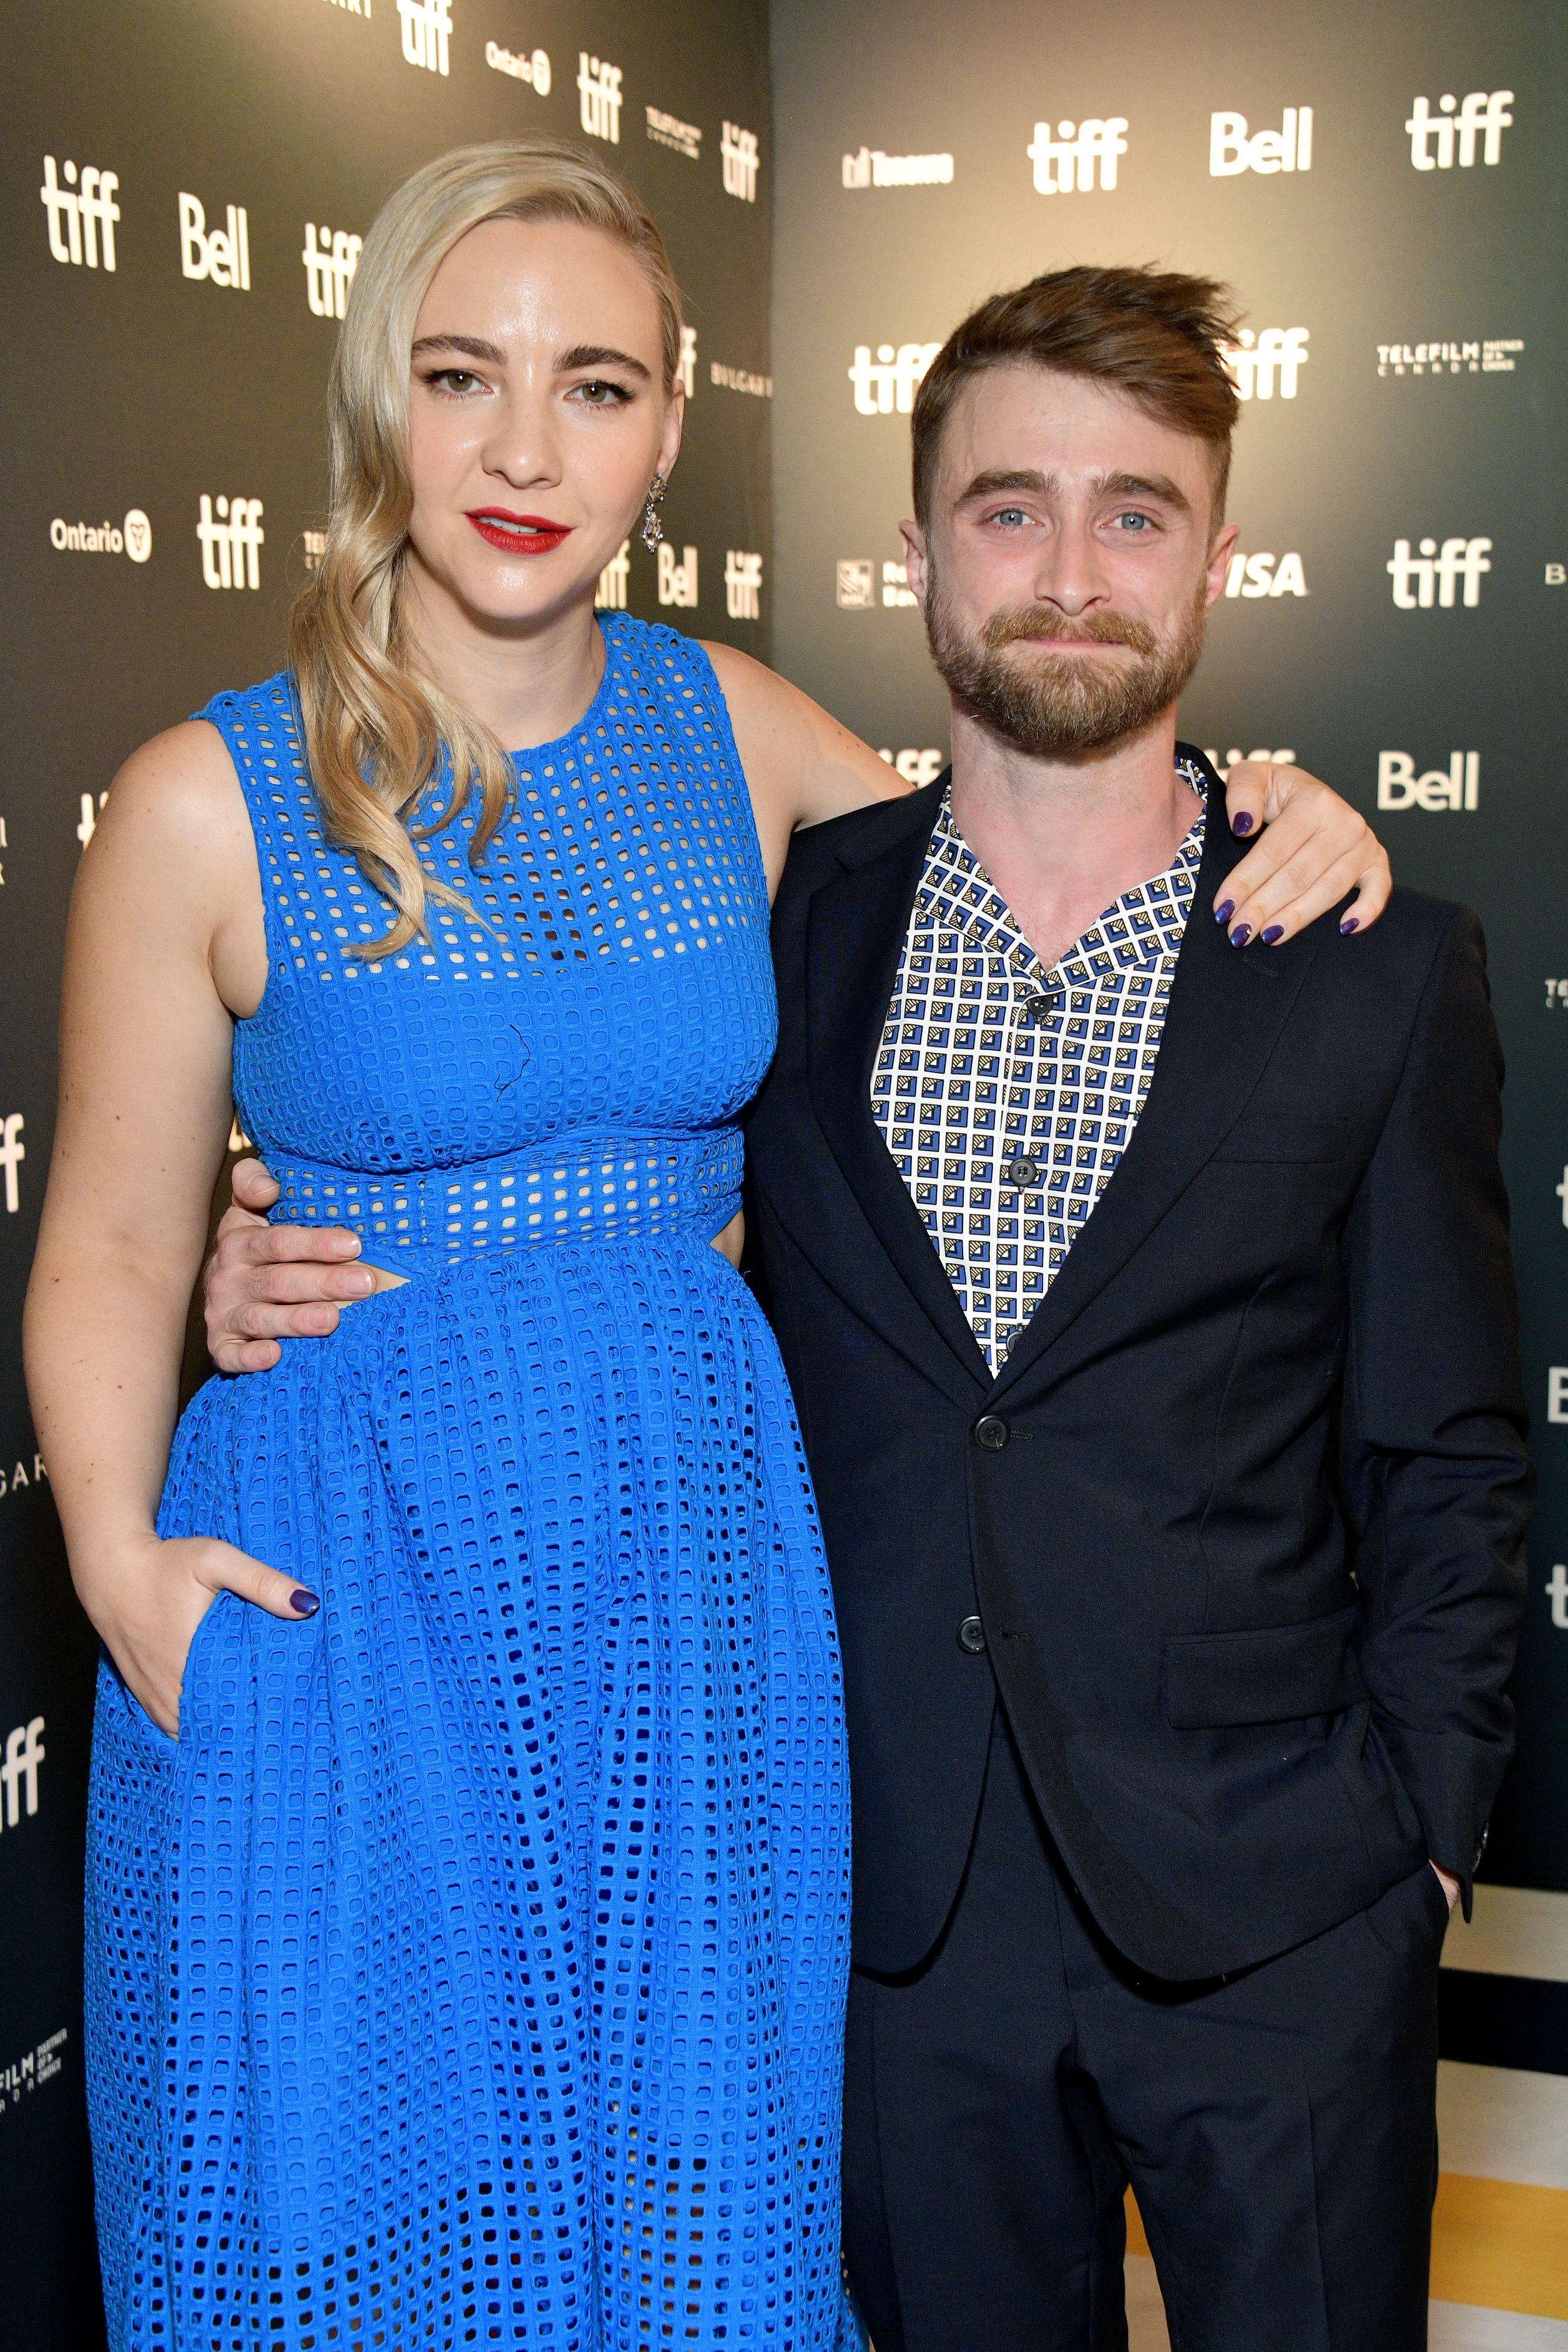 Erin Darke and Daniel Radcliffe at the "Weird: The Al Yankovic Story" in Toronto, Ontario on September 08, 2022 | Source: Getty Images